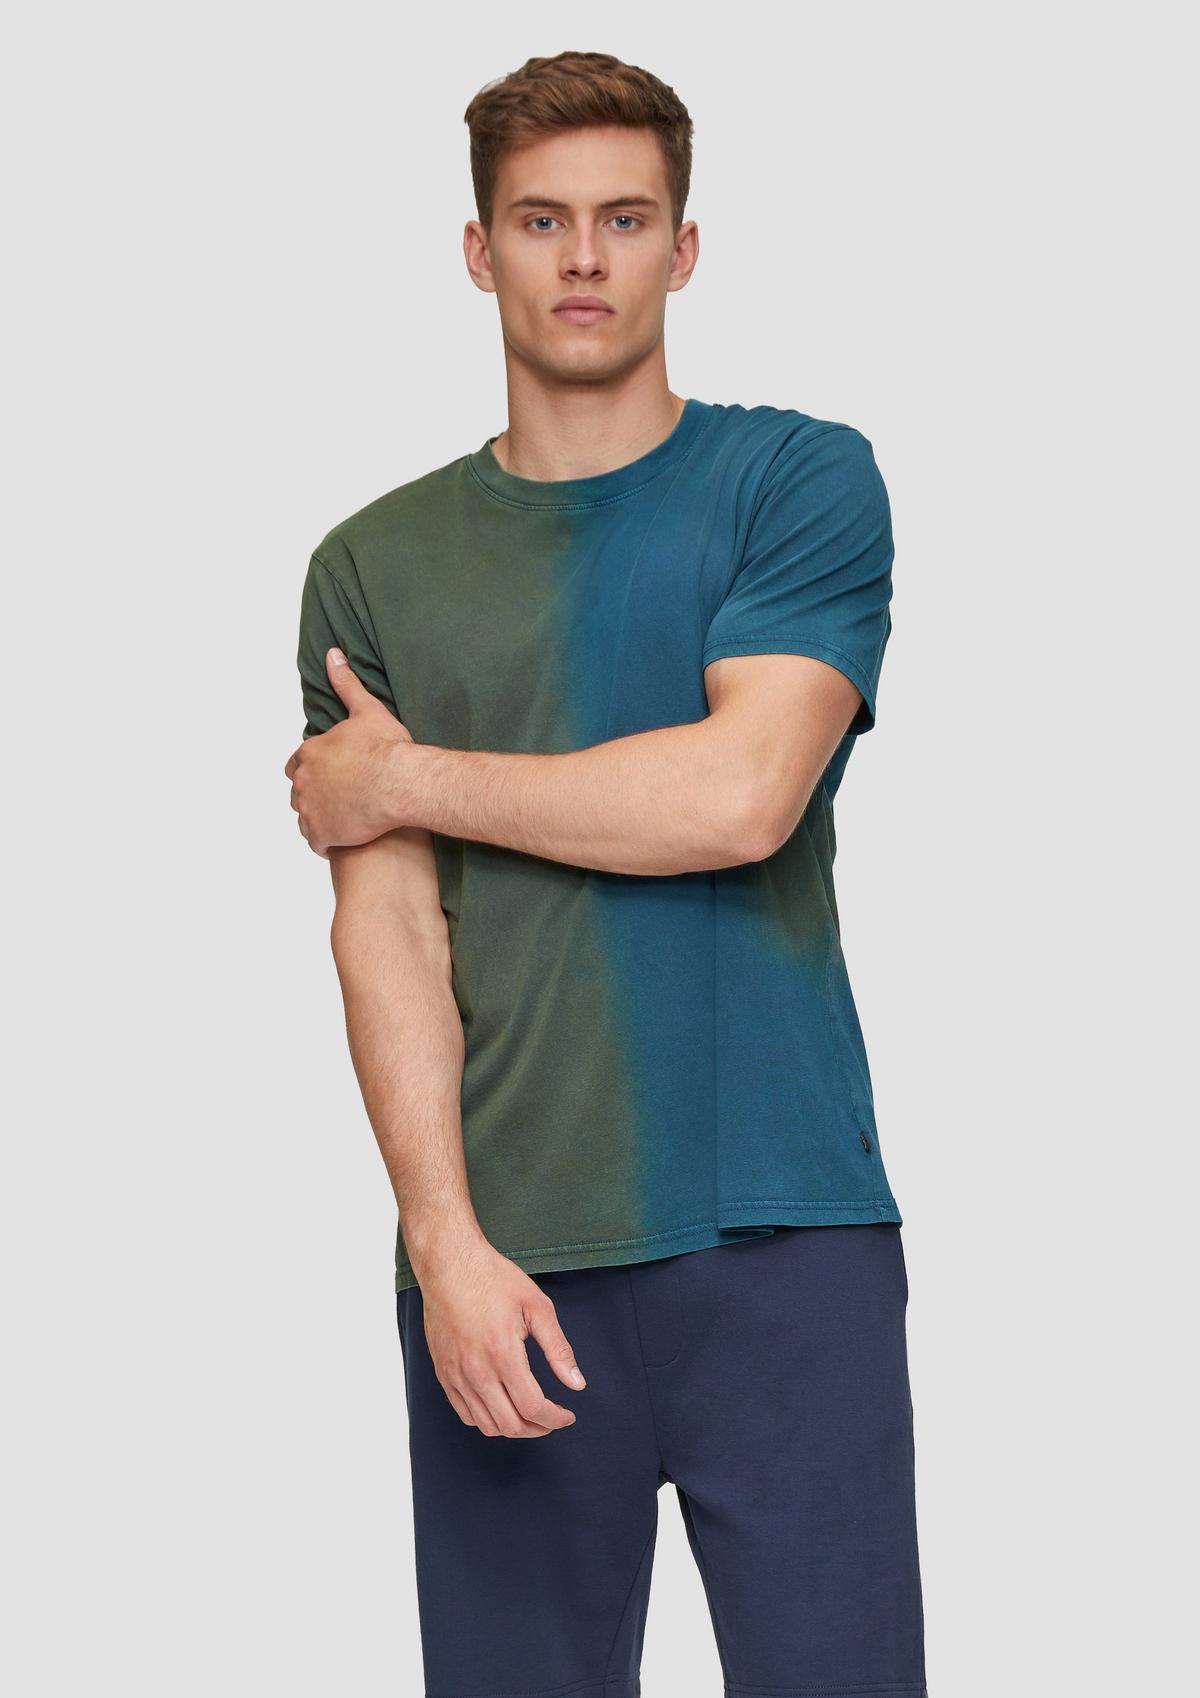 s.Oliver T-shirt with a garment wash